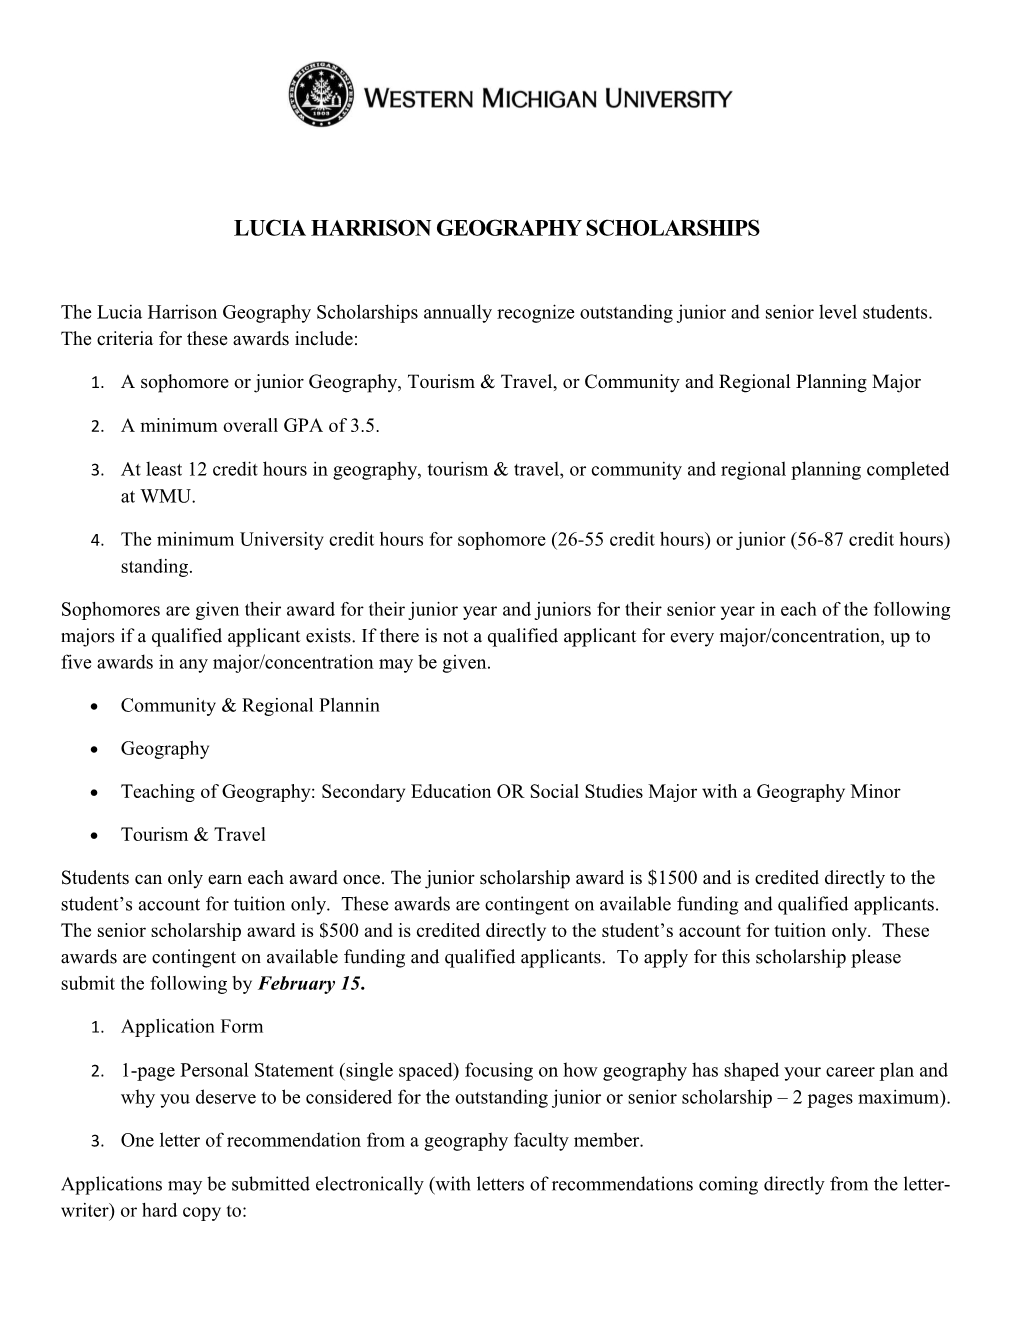 Lucia Harrison Geography Scholarships